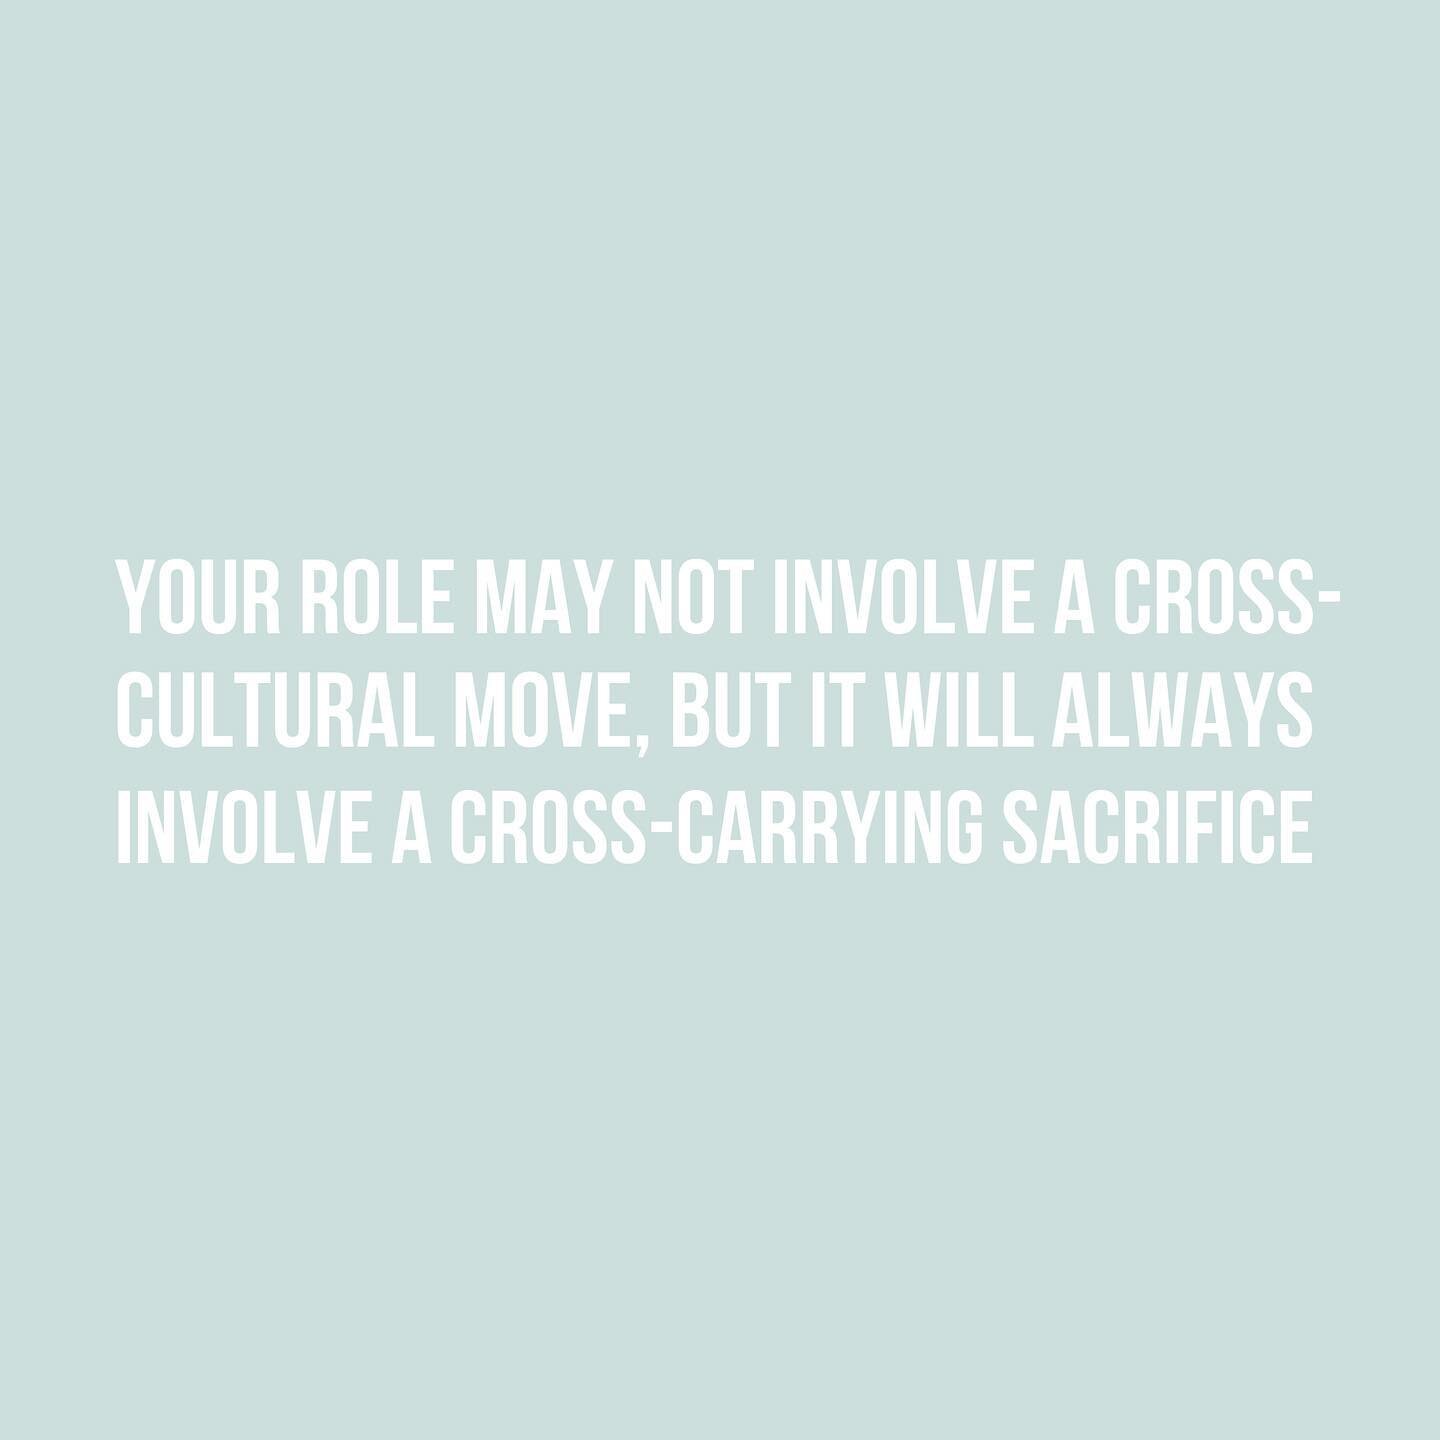 Your role may not involve a CROSS-CULTURAL move, but it will always involve a CROSS-CARRYING sacrifice!